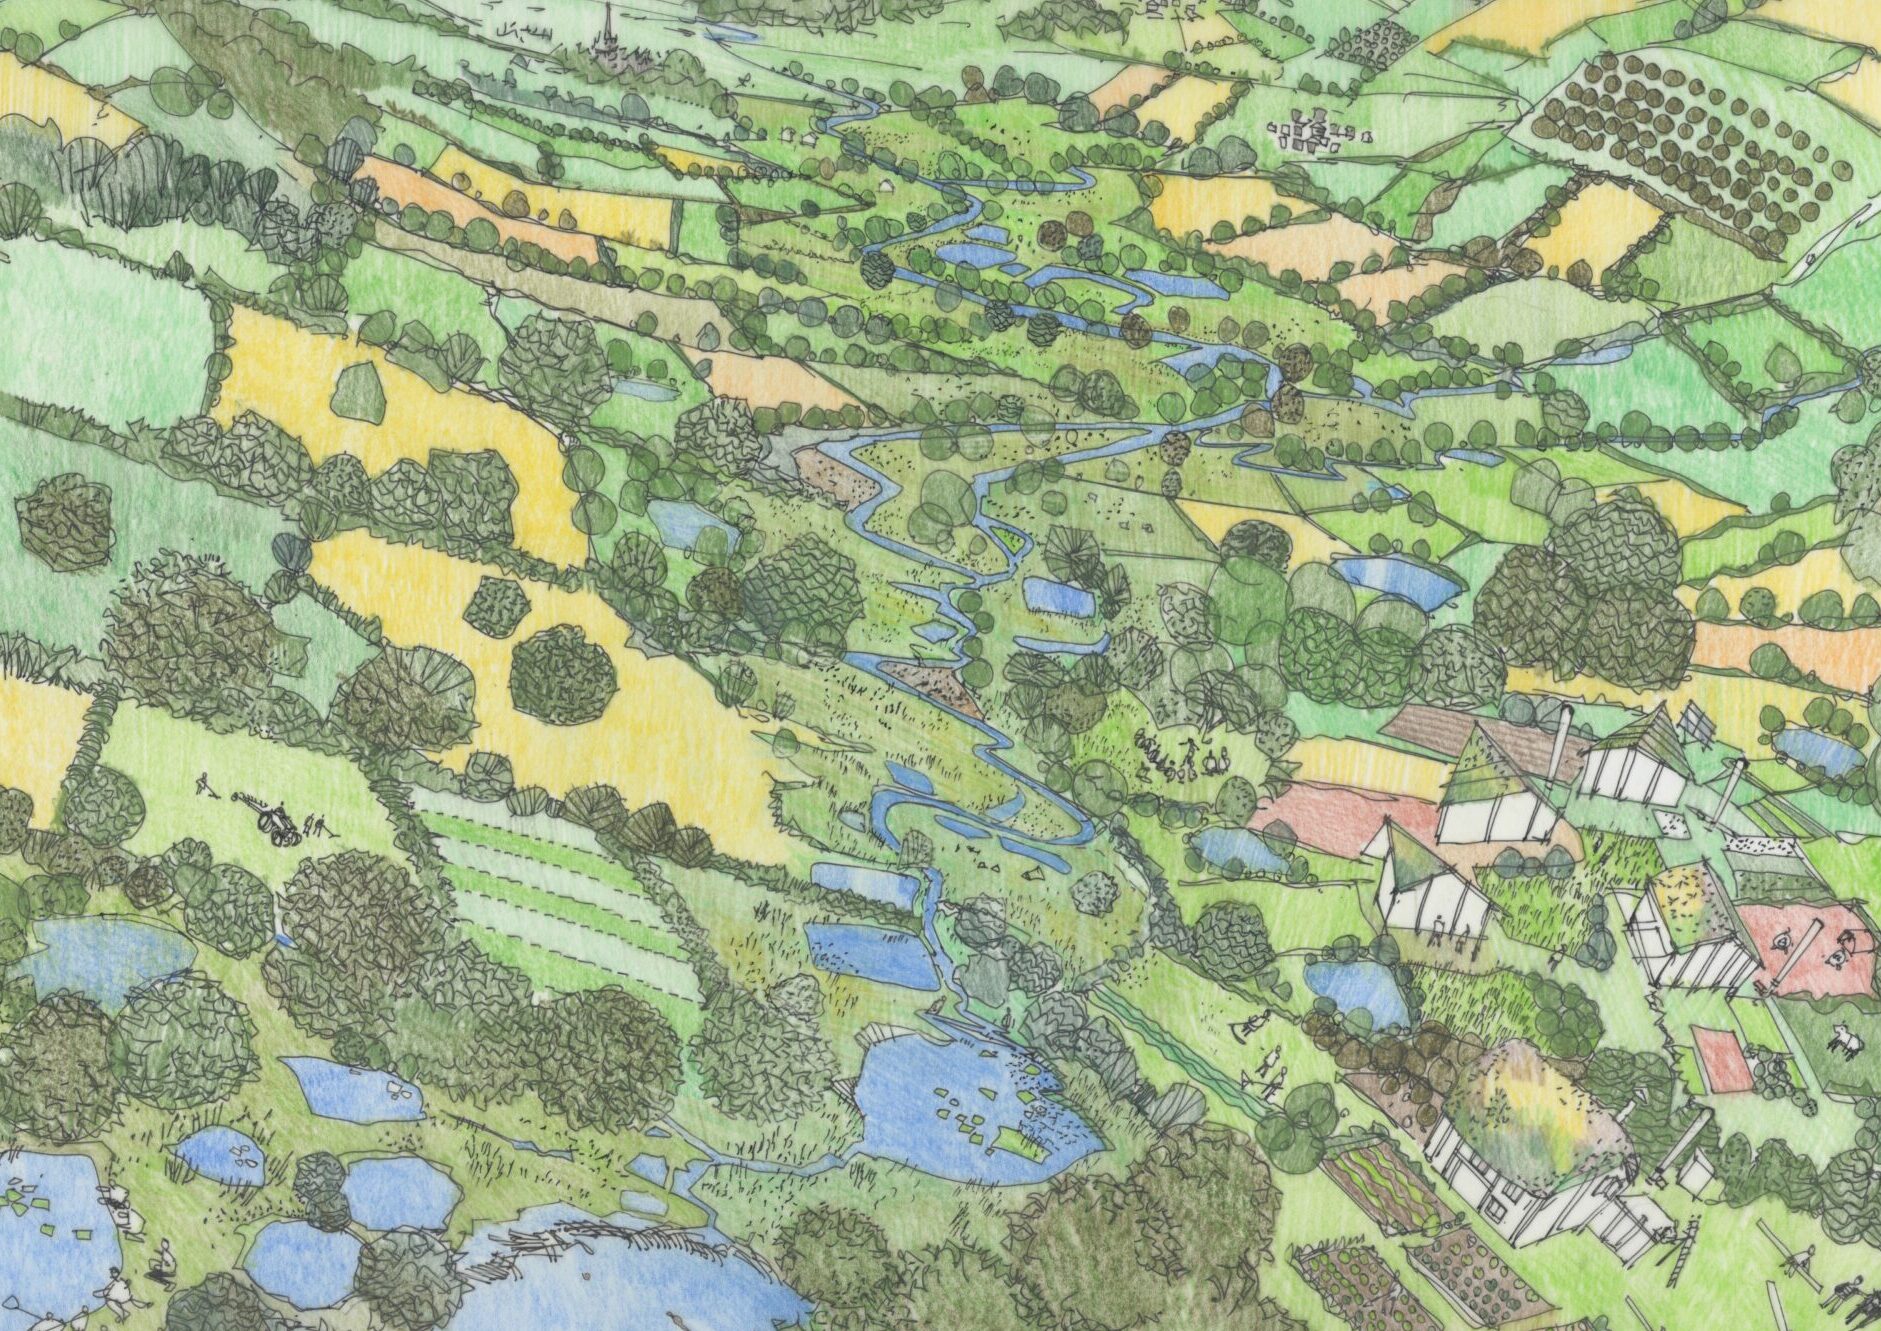 Summer in the headwaters: An illustration envisaging the future of the River Culm